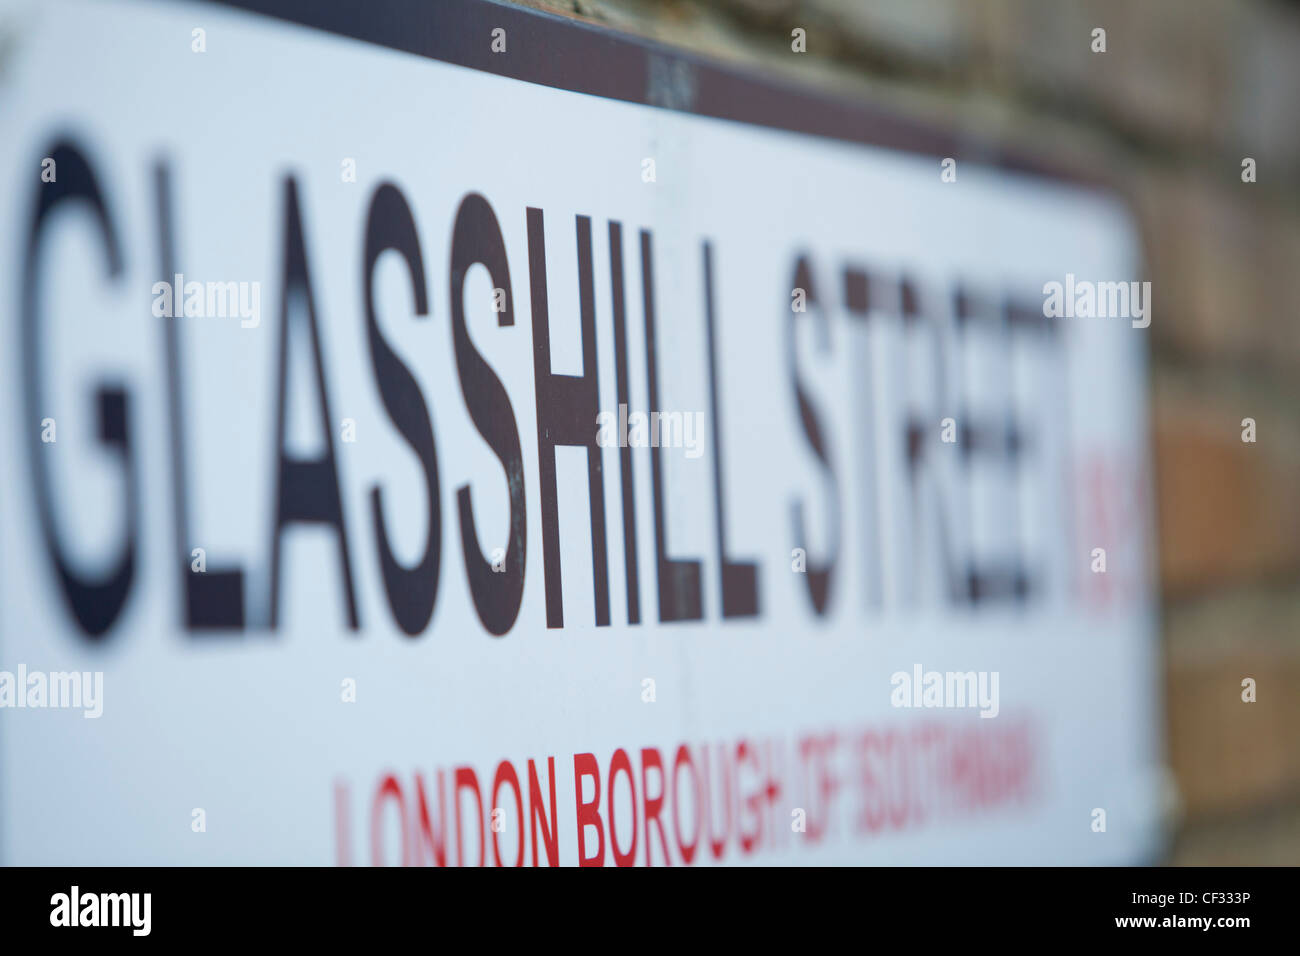 A view of a road sign for Glasshill Street in the London Borough of Southwark Stock Photo